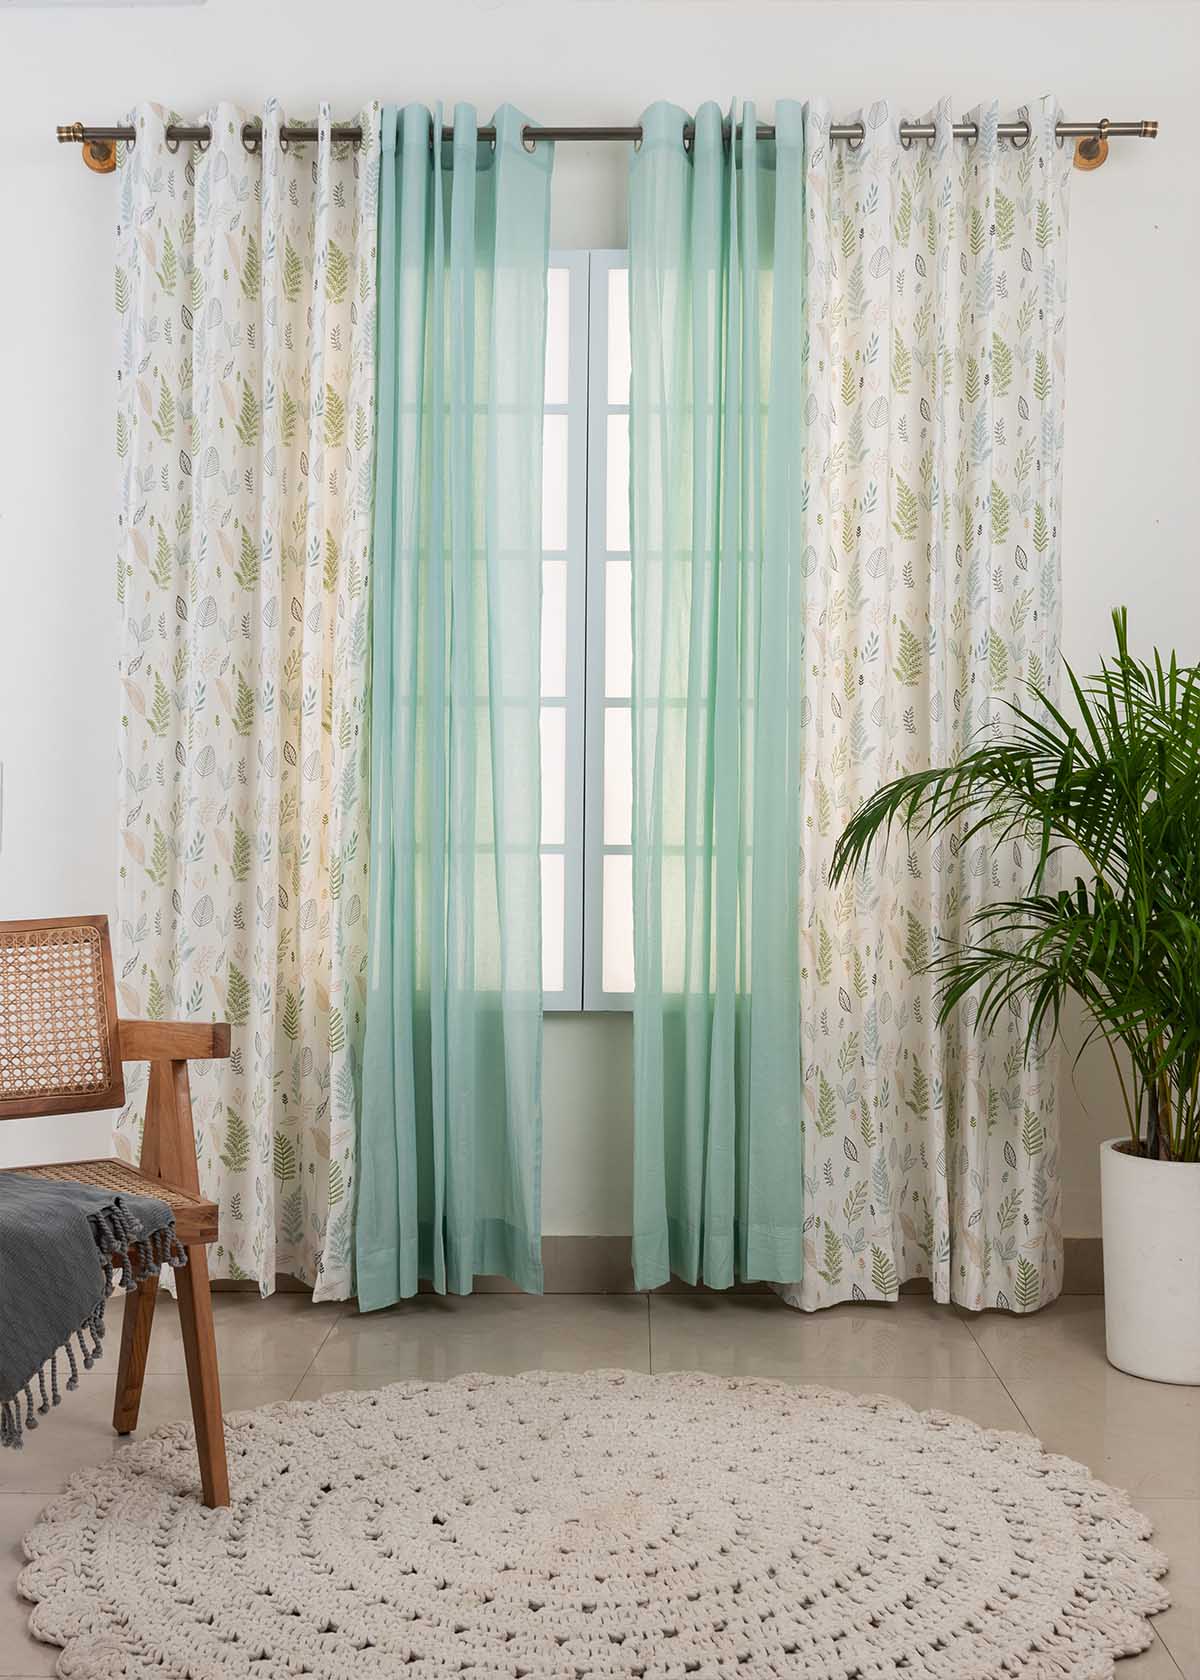 Rustling Leaves Shades Of Green, Nile Blue Sheer Set Of 4 Combo Cotton Curtain - Green And Nile Blue